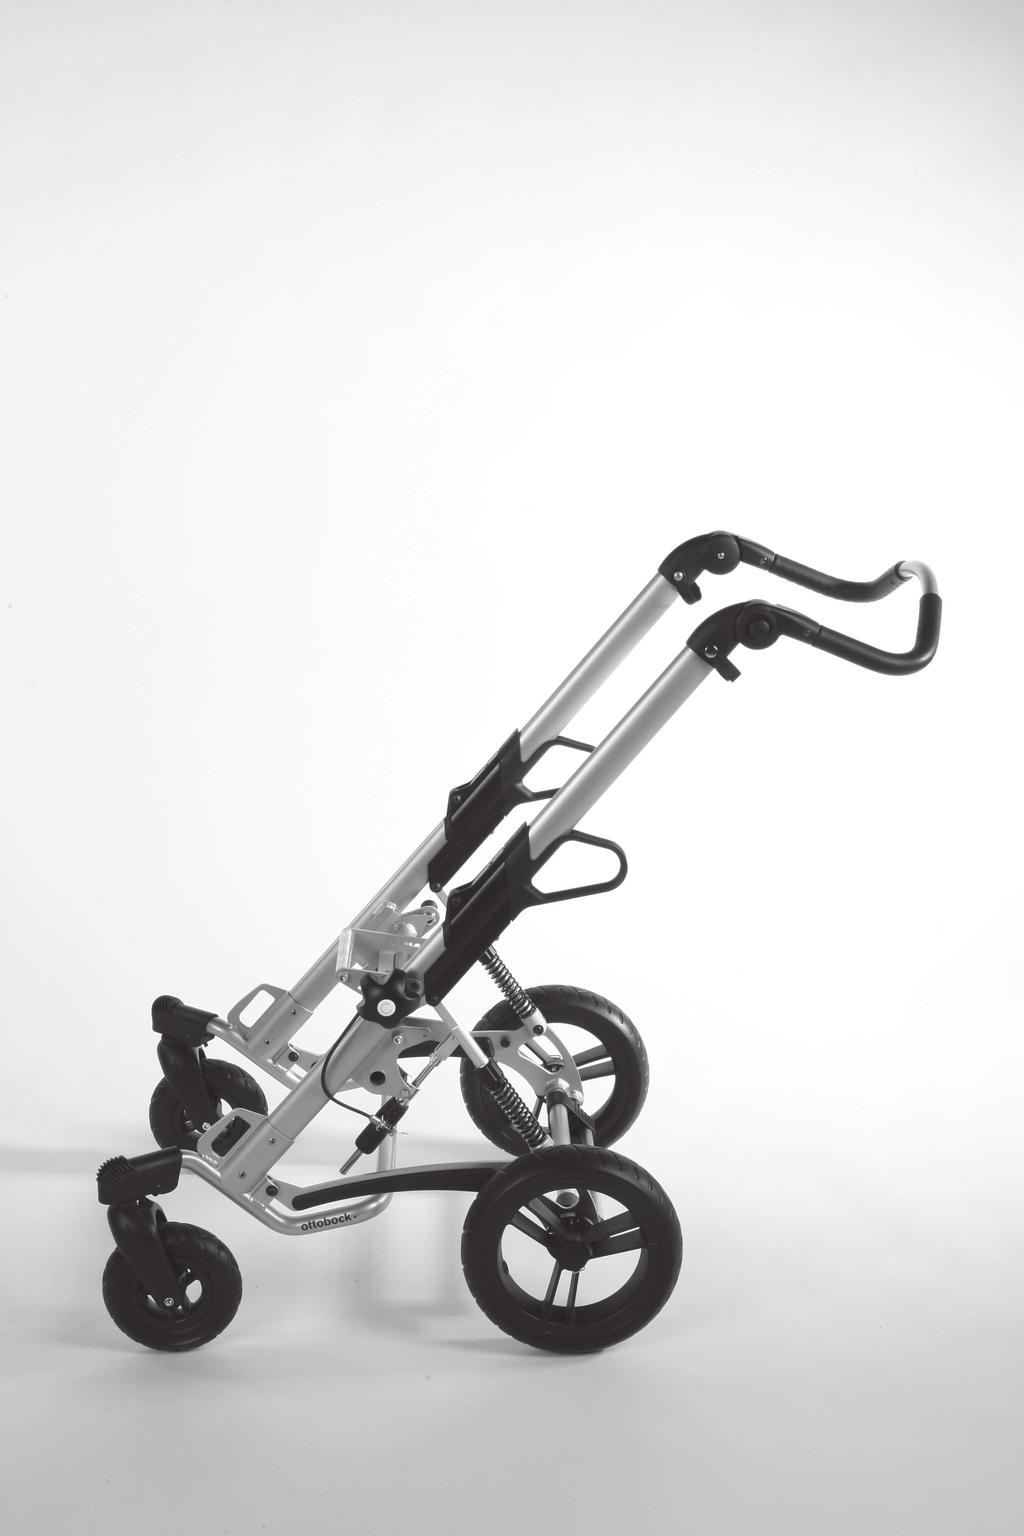 Product description 1 Kimba Neo outdoor mobility base for alternative seating systems with "swivelling" front wheels option 1 Plug-on rear wheel 6 Adjustable push bar 2 "Swivelling" front